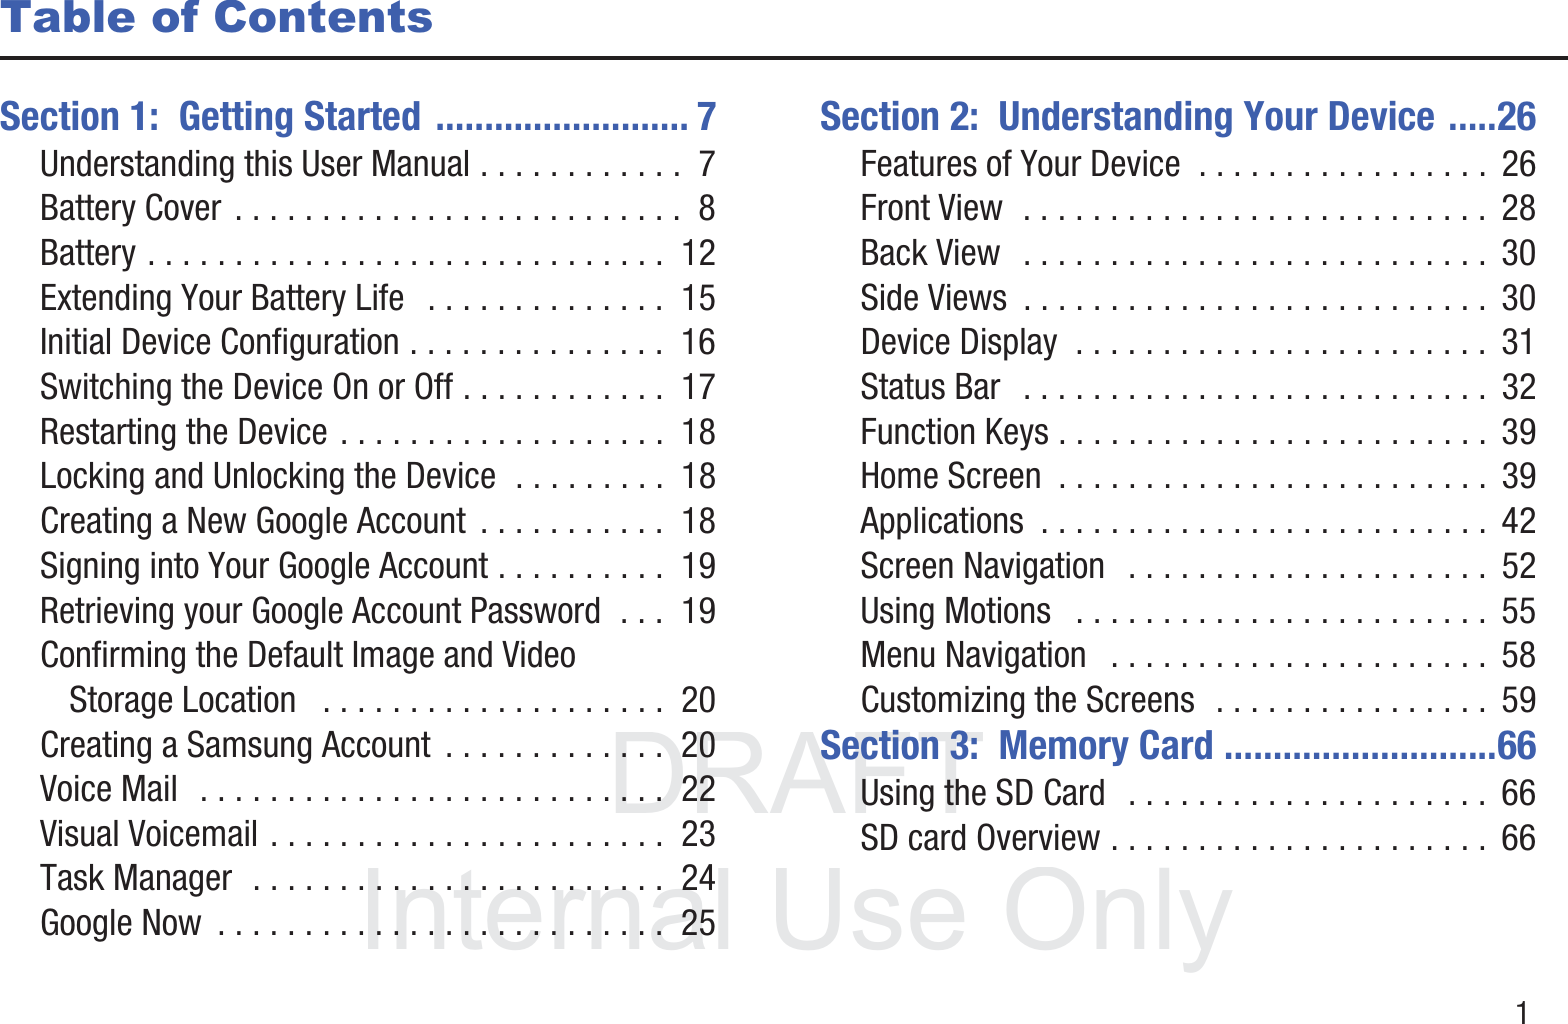 DRAFT InternalUse Only       1Table of ContentsSection 1:  Getting Started .......................... 7Understanding this User Manual . . . . . . . . . . . .  7Battery Cover . . . . . . . . . . . . . . . . . . . . . . . . . .  8Battery . . . . . . . . . . . . . . . . . . . . . . . . . . . . . .  12Extending Your Battery Life   . . . . . . . . . . . . . .  15Initial Device Configuration . . . . . . . . . . . . . . .  16Switching the Device On or Off . . . . . . . . . . . .  17Restarting the Device . . . . . . . . . . . . . . . . . . .  18Locking and Unlocking the Device  . . . . . . . . .  18Creating a New Google Account  . . . . . . . . . . .  18Signing into Your Google Account . . . . . . . . . .  19Retrieving your Google Account Password  . . .  19Confirming the Default Image and Video Storage Location   . . . . . . . . . . . . . . . . . . . .  20Creating a Samsung Account  . . . . . . . . . . . . .  20Voice Mail  . . . . . . . . . . . . . . . . . . . . . . . . . . .  22Visual Voicemail . . . . . . . . . . . . . . . . . . . . . . .  23Task Manager  . . . . . . . . . . . . . . . . . . . . . . . .  24Google Now  . . . . . . . . . . . . . . . . . . . . . . . . . .  25Section 2:  Understanding Your Device .....26Features of Your Device  . . . . . . . . . . . . . . . . .  26Front View  . . . . . . . . . . . . . . . . . . . . . . . . . . .  28Back View   . . . . . . . . . . . . . . . . . . . . . . . . . . .  30Side Views  . . . . . . . . . . . . . . . . . . . . . . . . . . .  30Device Display  . . . . . . . . . . . . . . . . . . . . . . . .  31Status Bar   . . . . . . . . . . . . . . . . . . . . . . . . . . .  32Function Keys . . . . . . . . . . . . . . . . . . . . . . . . .  39Home Screen  . . . . . . . . . . . . . . . . . . . . . . . . .  39Applications  . . . . . . . . . . . . . . . . . . . . . . . . . .  42Screen Navigation   . . . . . . . . . . . . . . . . . . . . .  52Using Motions   . . . . . . . . . . . . . . . . . . . . . . . .  55Menu Navigation   . . . . . . . . . . . . . . . . . . . . . .  58Customizing the Screens  . . . . . . . . . . . . . . . .  59Section 3:  Memory Card ............................66Using the SD Card   . . . . . . . . . . . . . . . . . . . . .  66SD card Overview . . . . . . . . . . . . . . . . . . . . . .  66